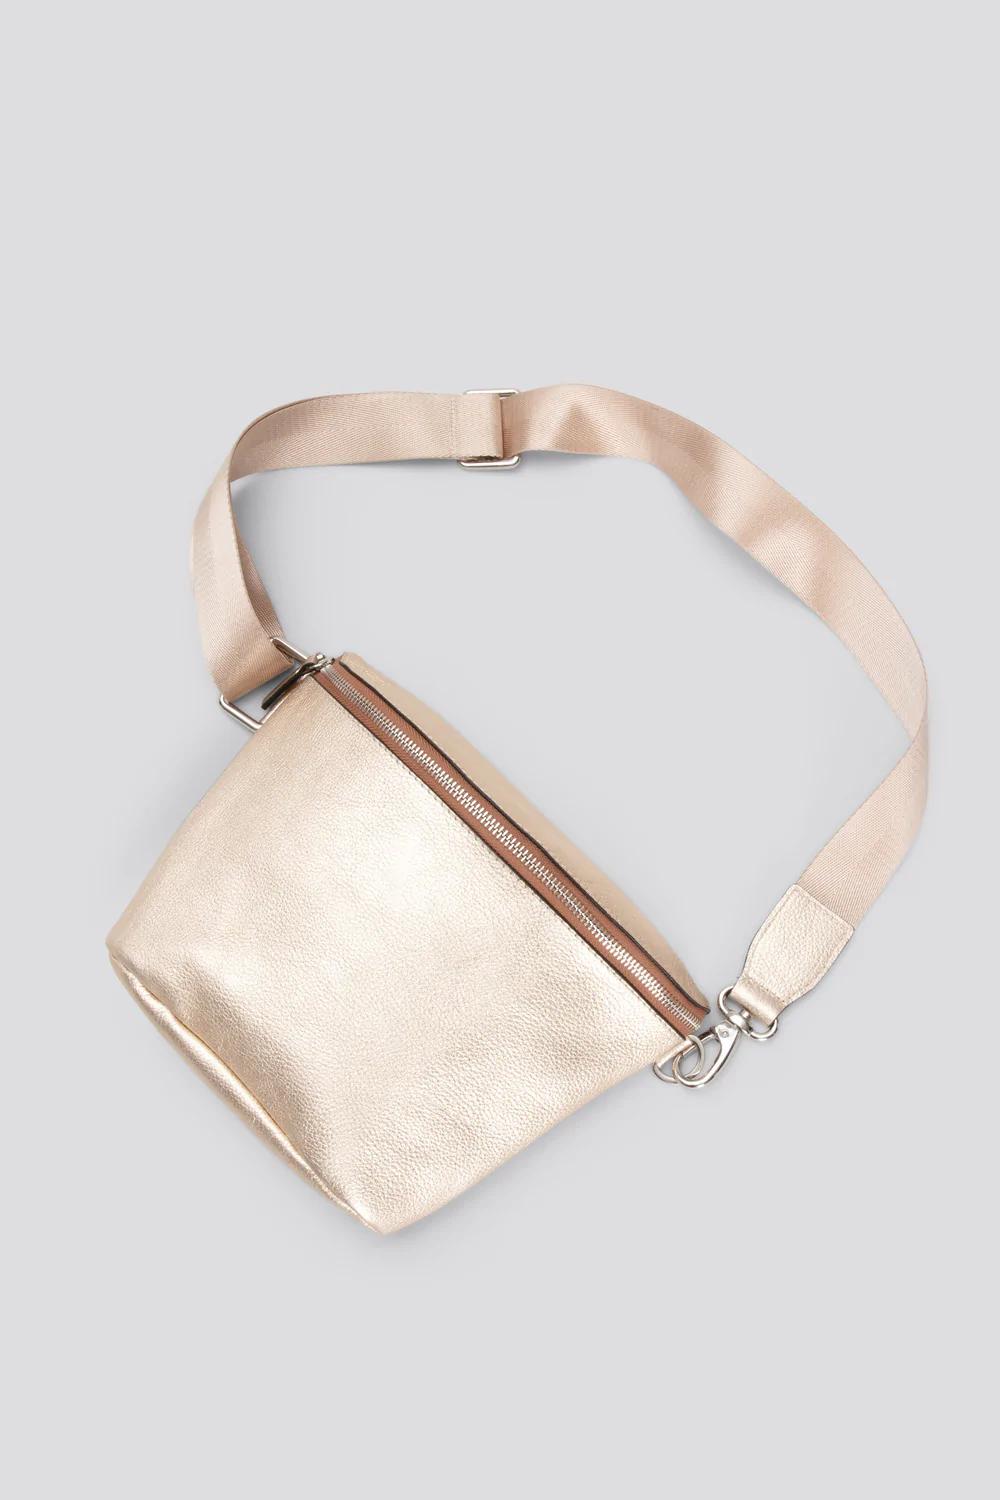 Product Image for Keno Leather Bag, Gold